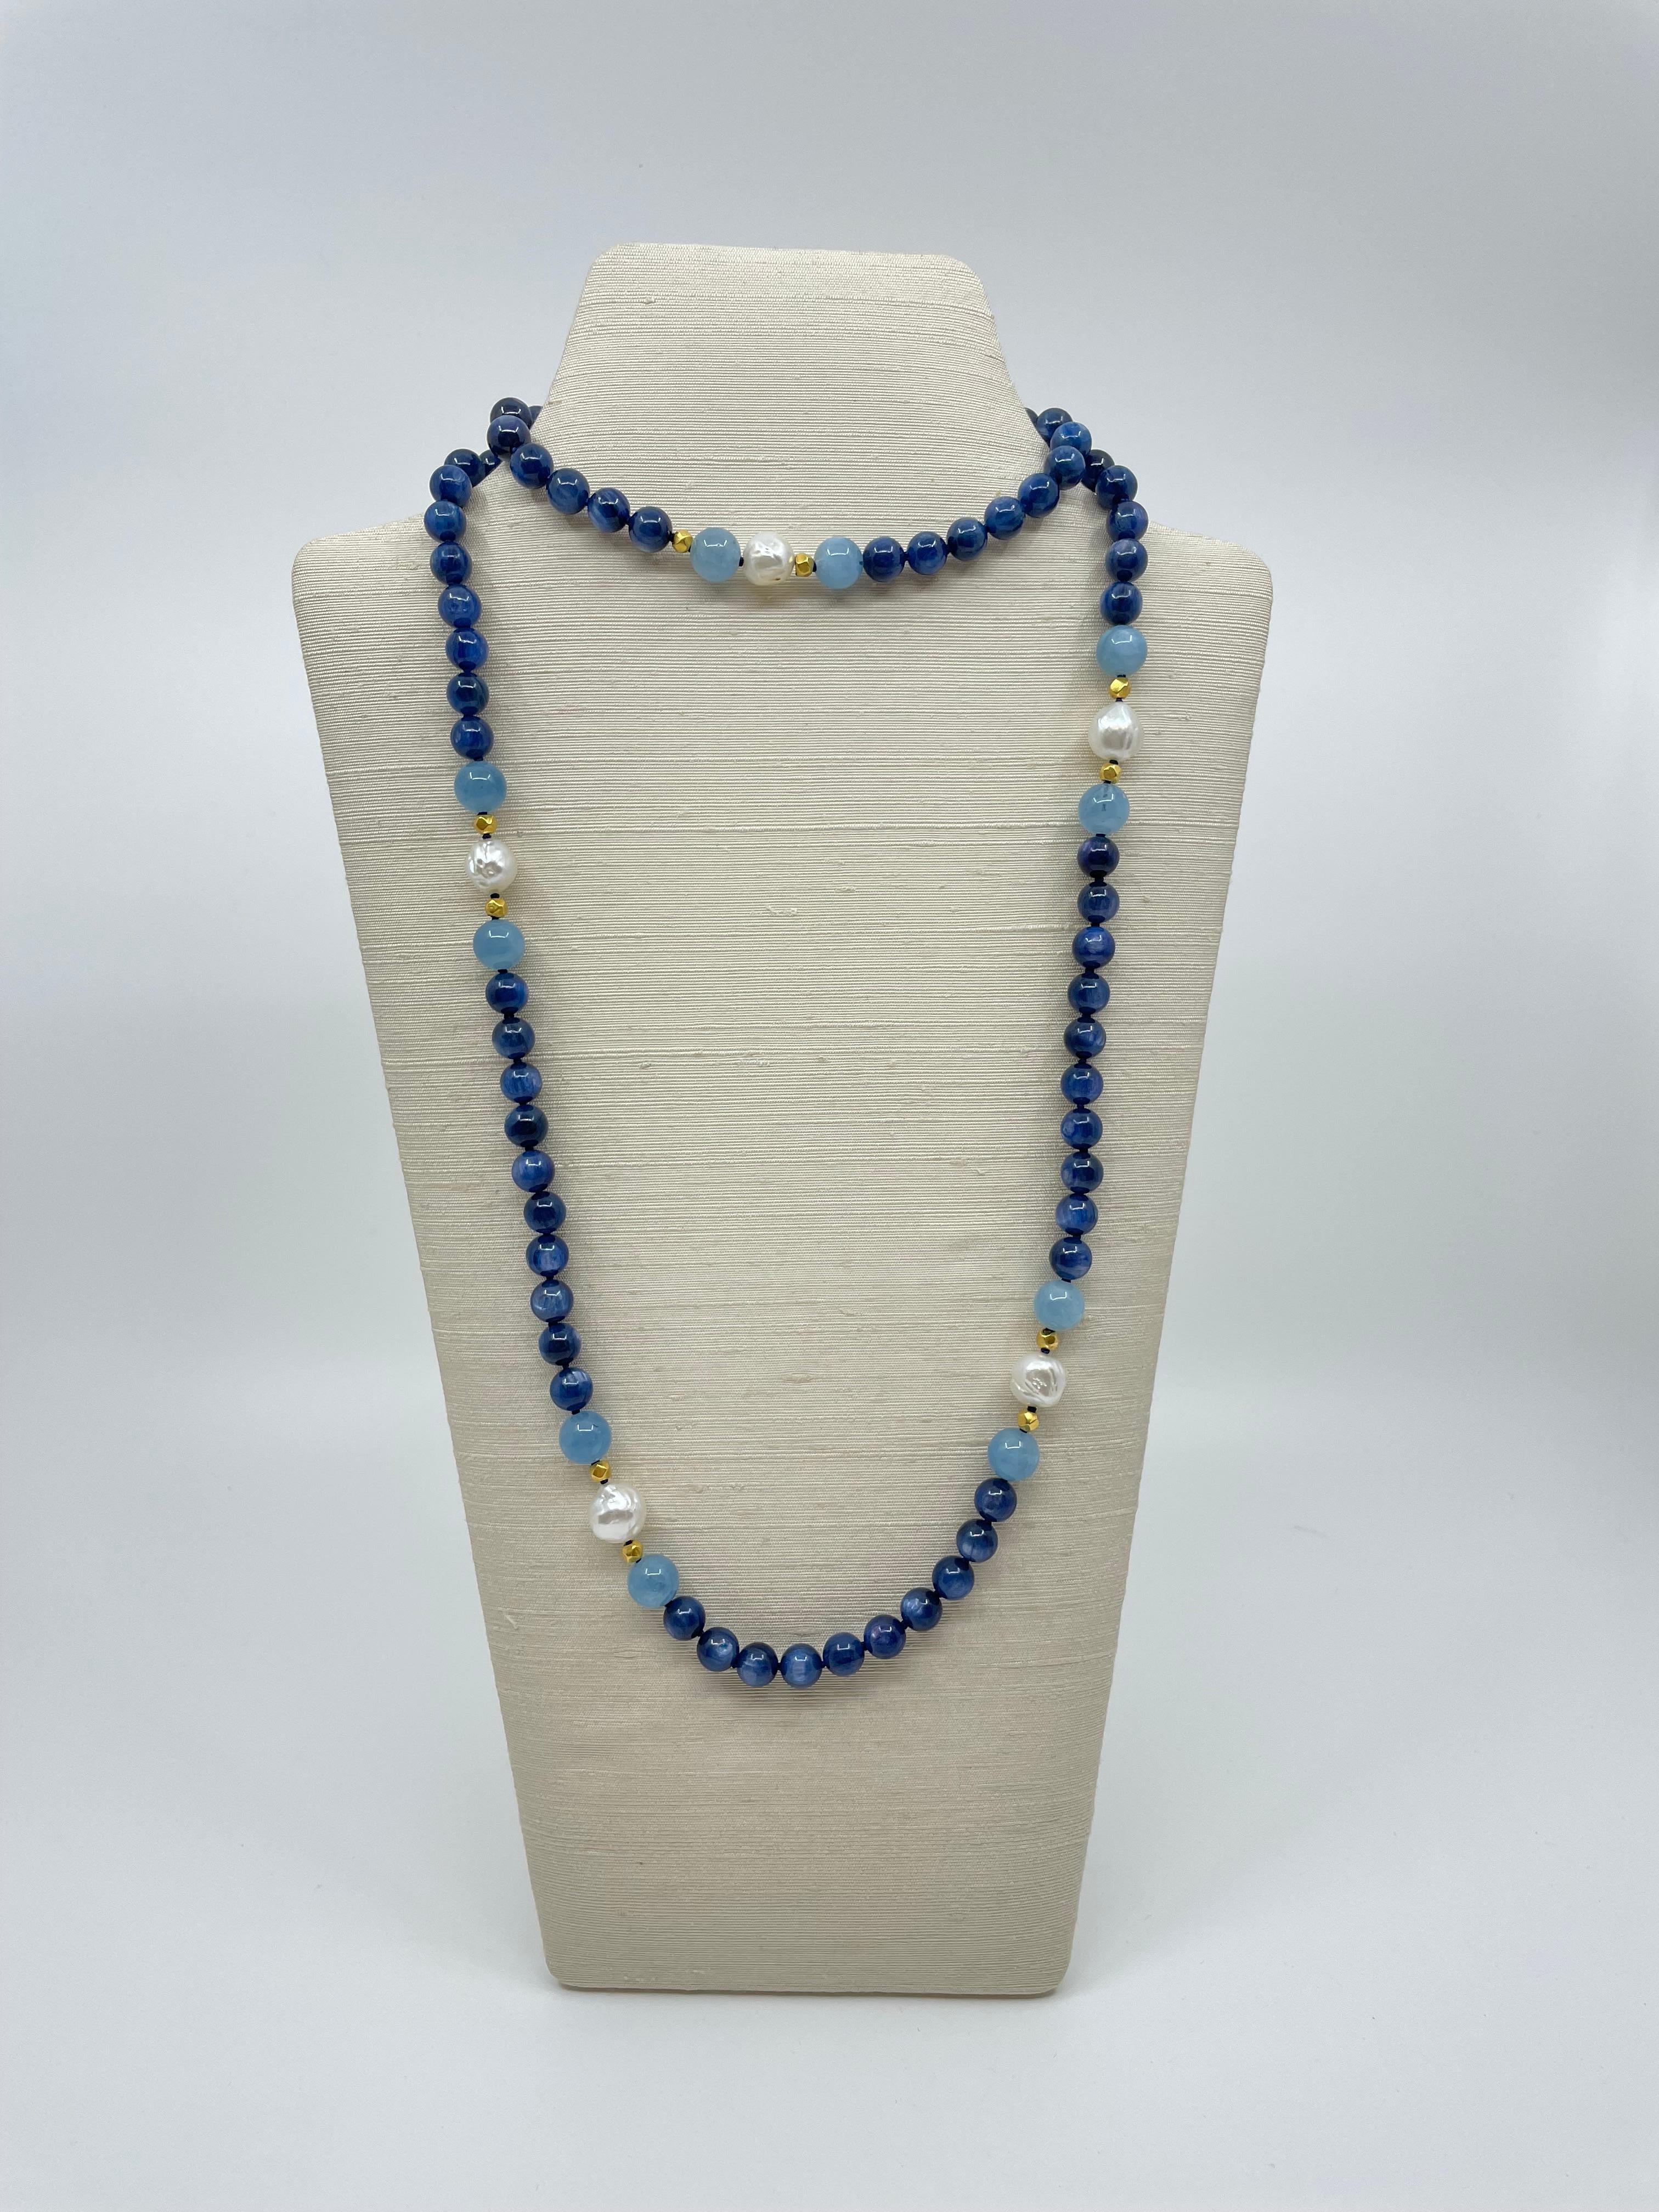 Long Necklace with Kyanite, Aquamarine, South Sea Pearls & 18K Solid Gold Beads For Sale 4